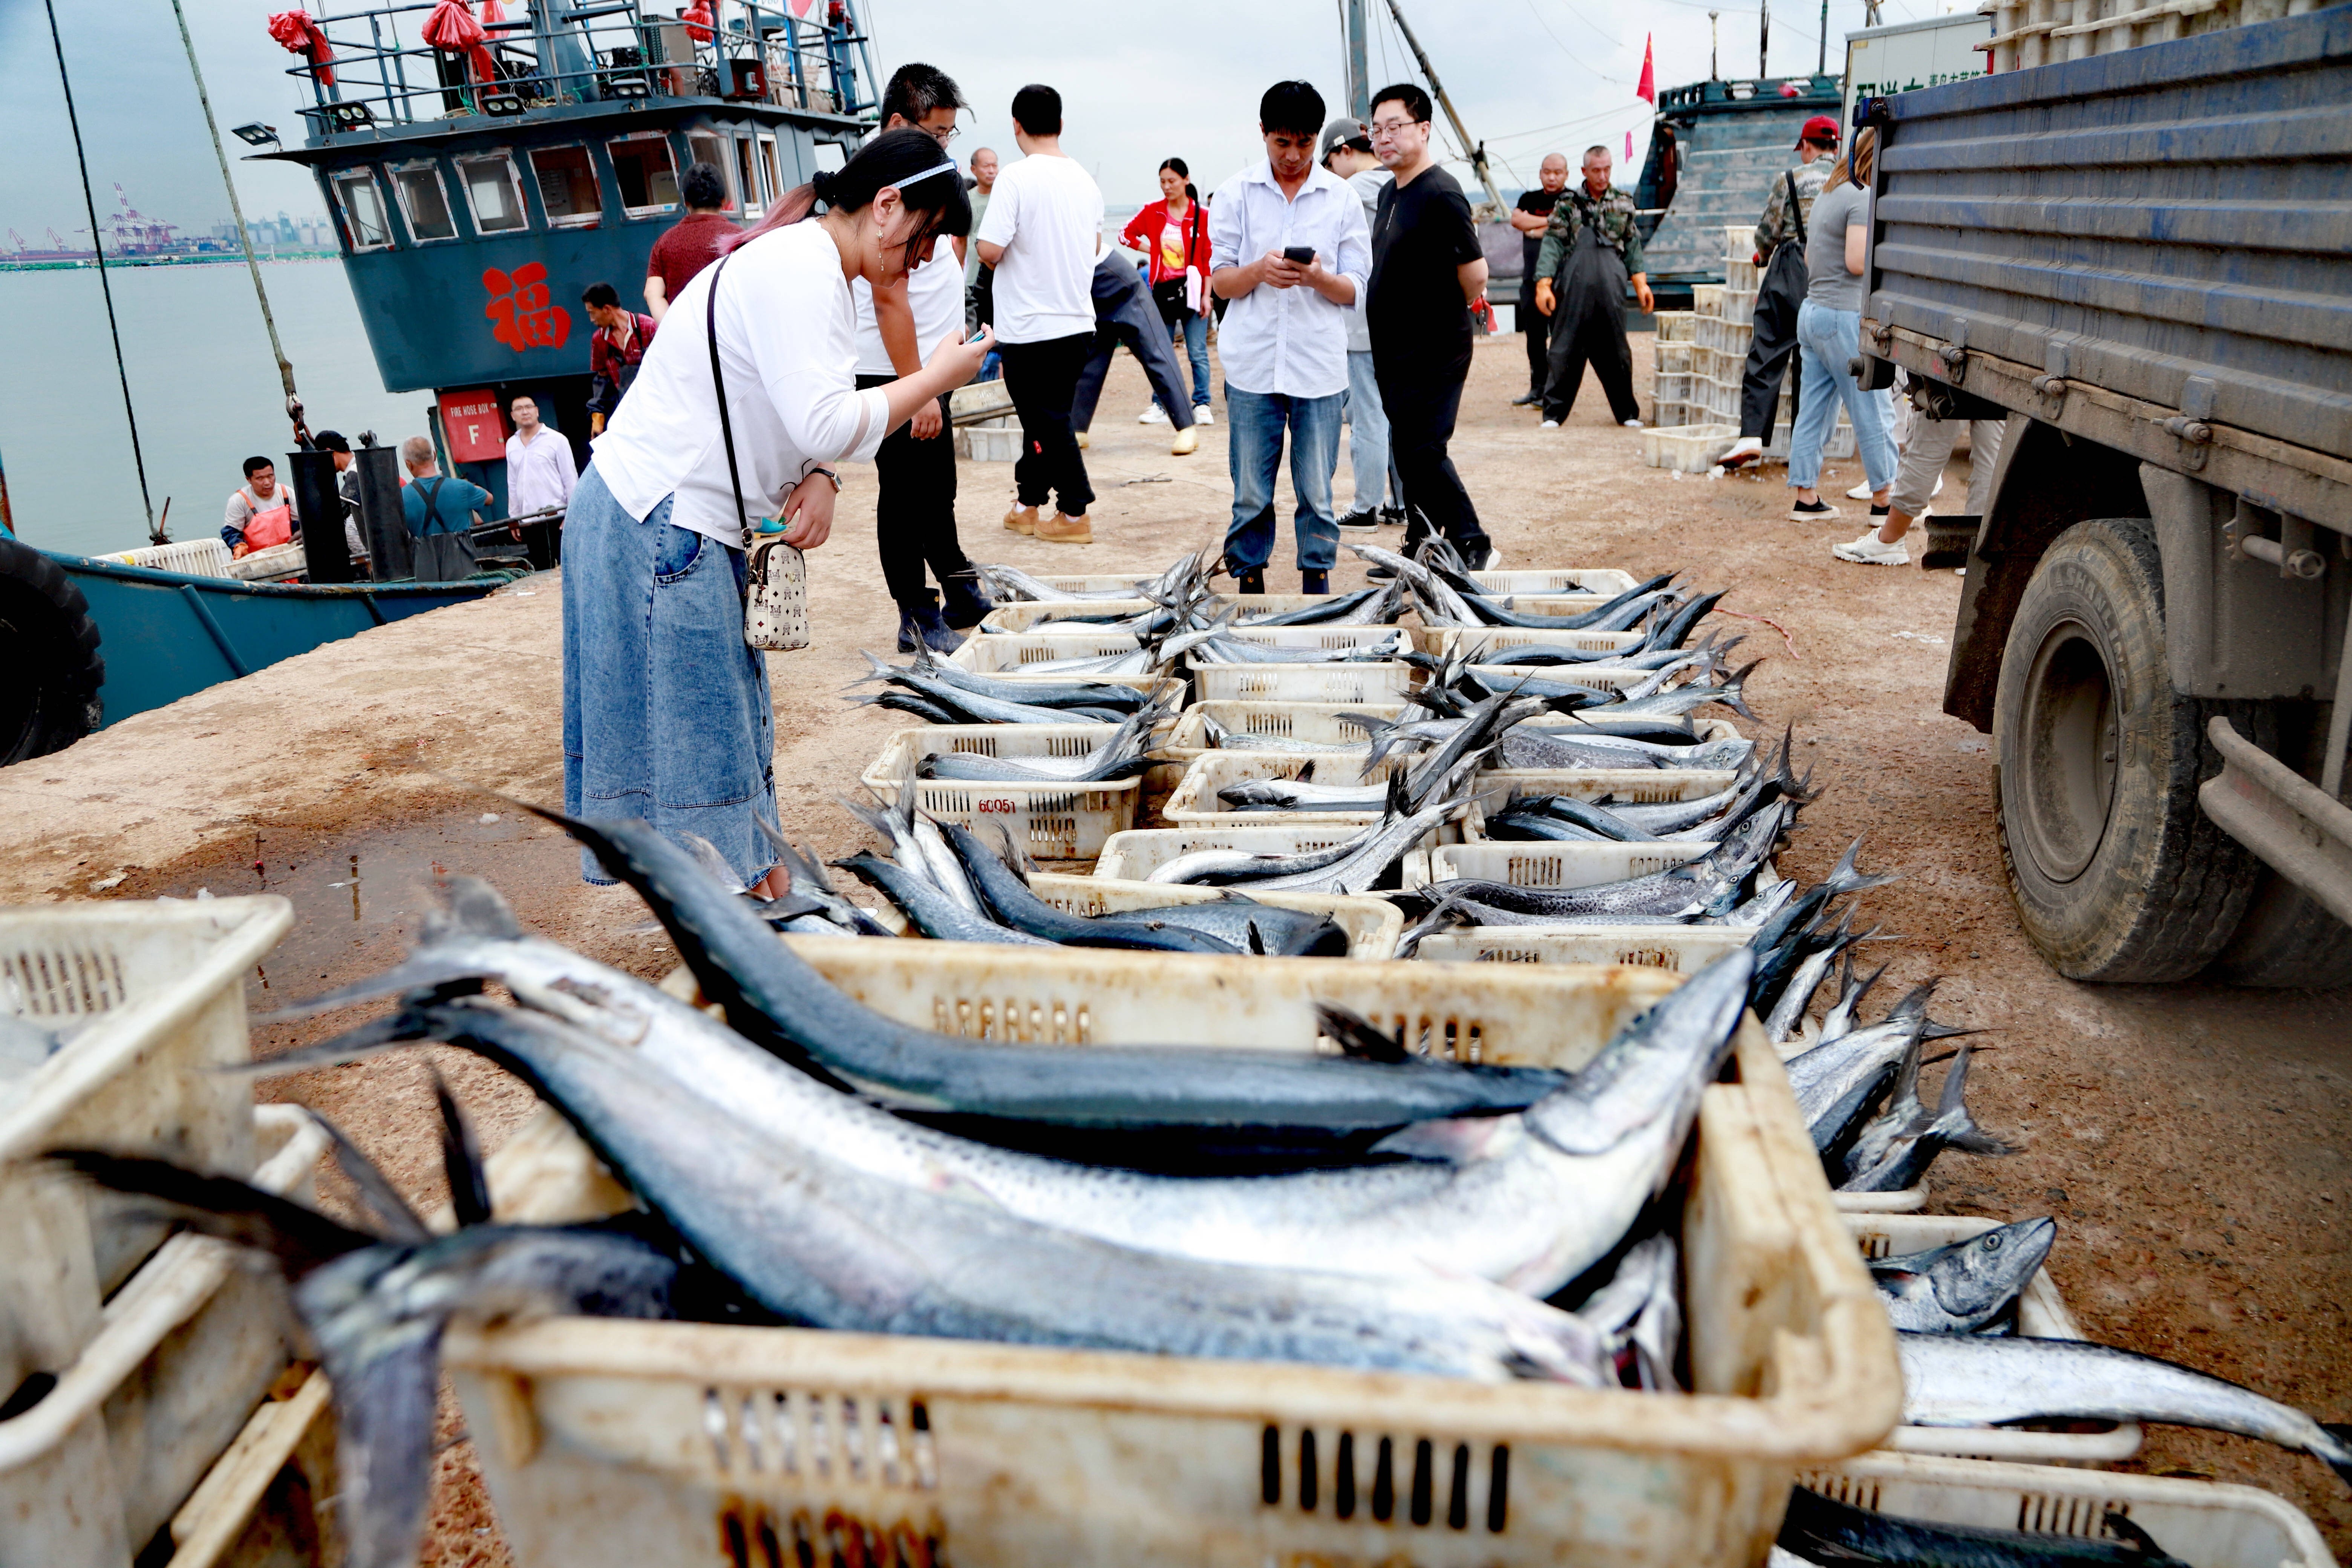 “More valuable than diamonds”: the South and East China seas are the two most important fishing areas in the western Pacific, providing food and livelihoods to millions of people. Photo: VCG via Getty Images